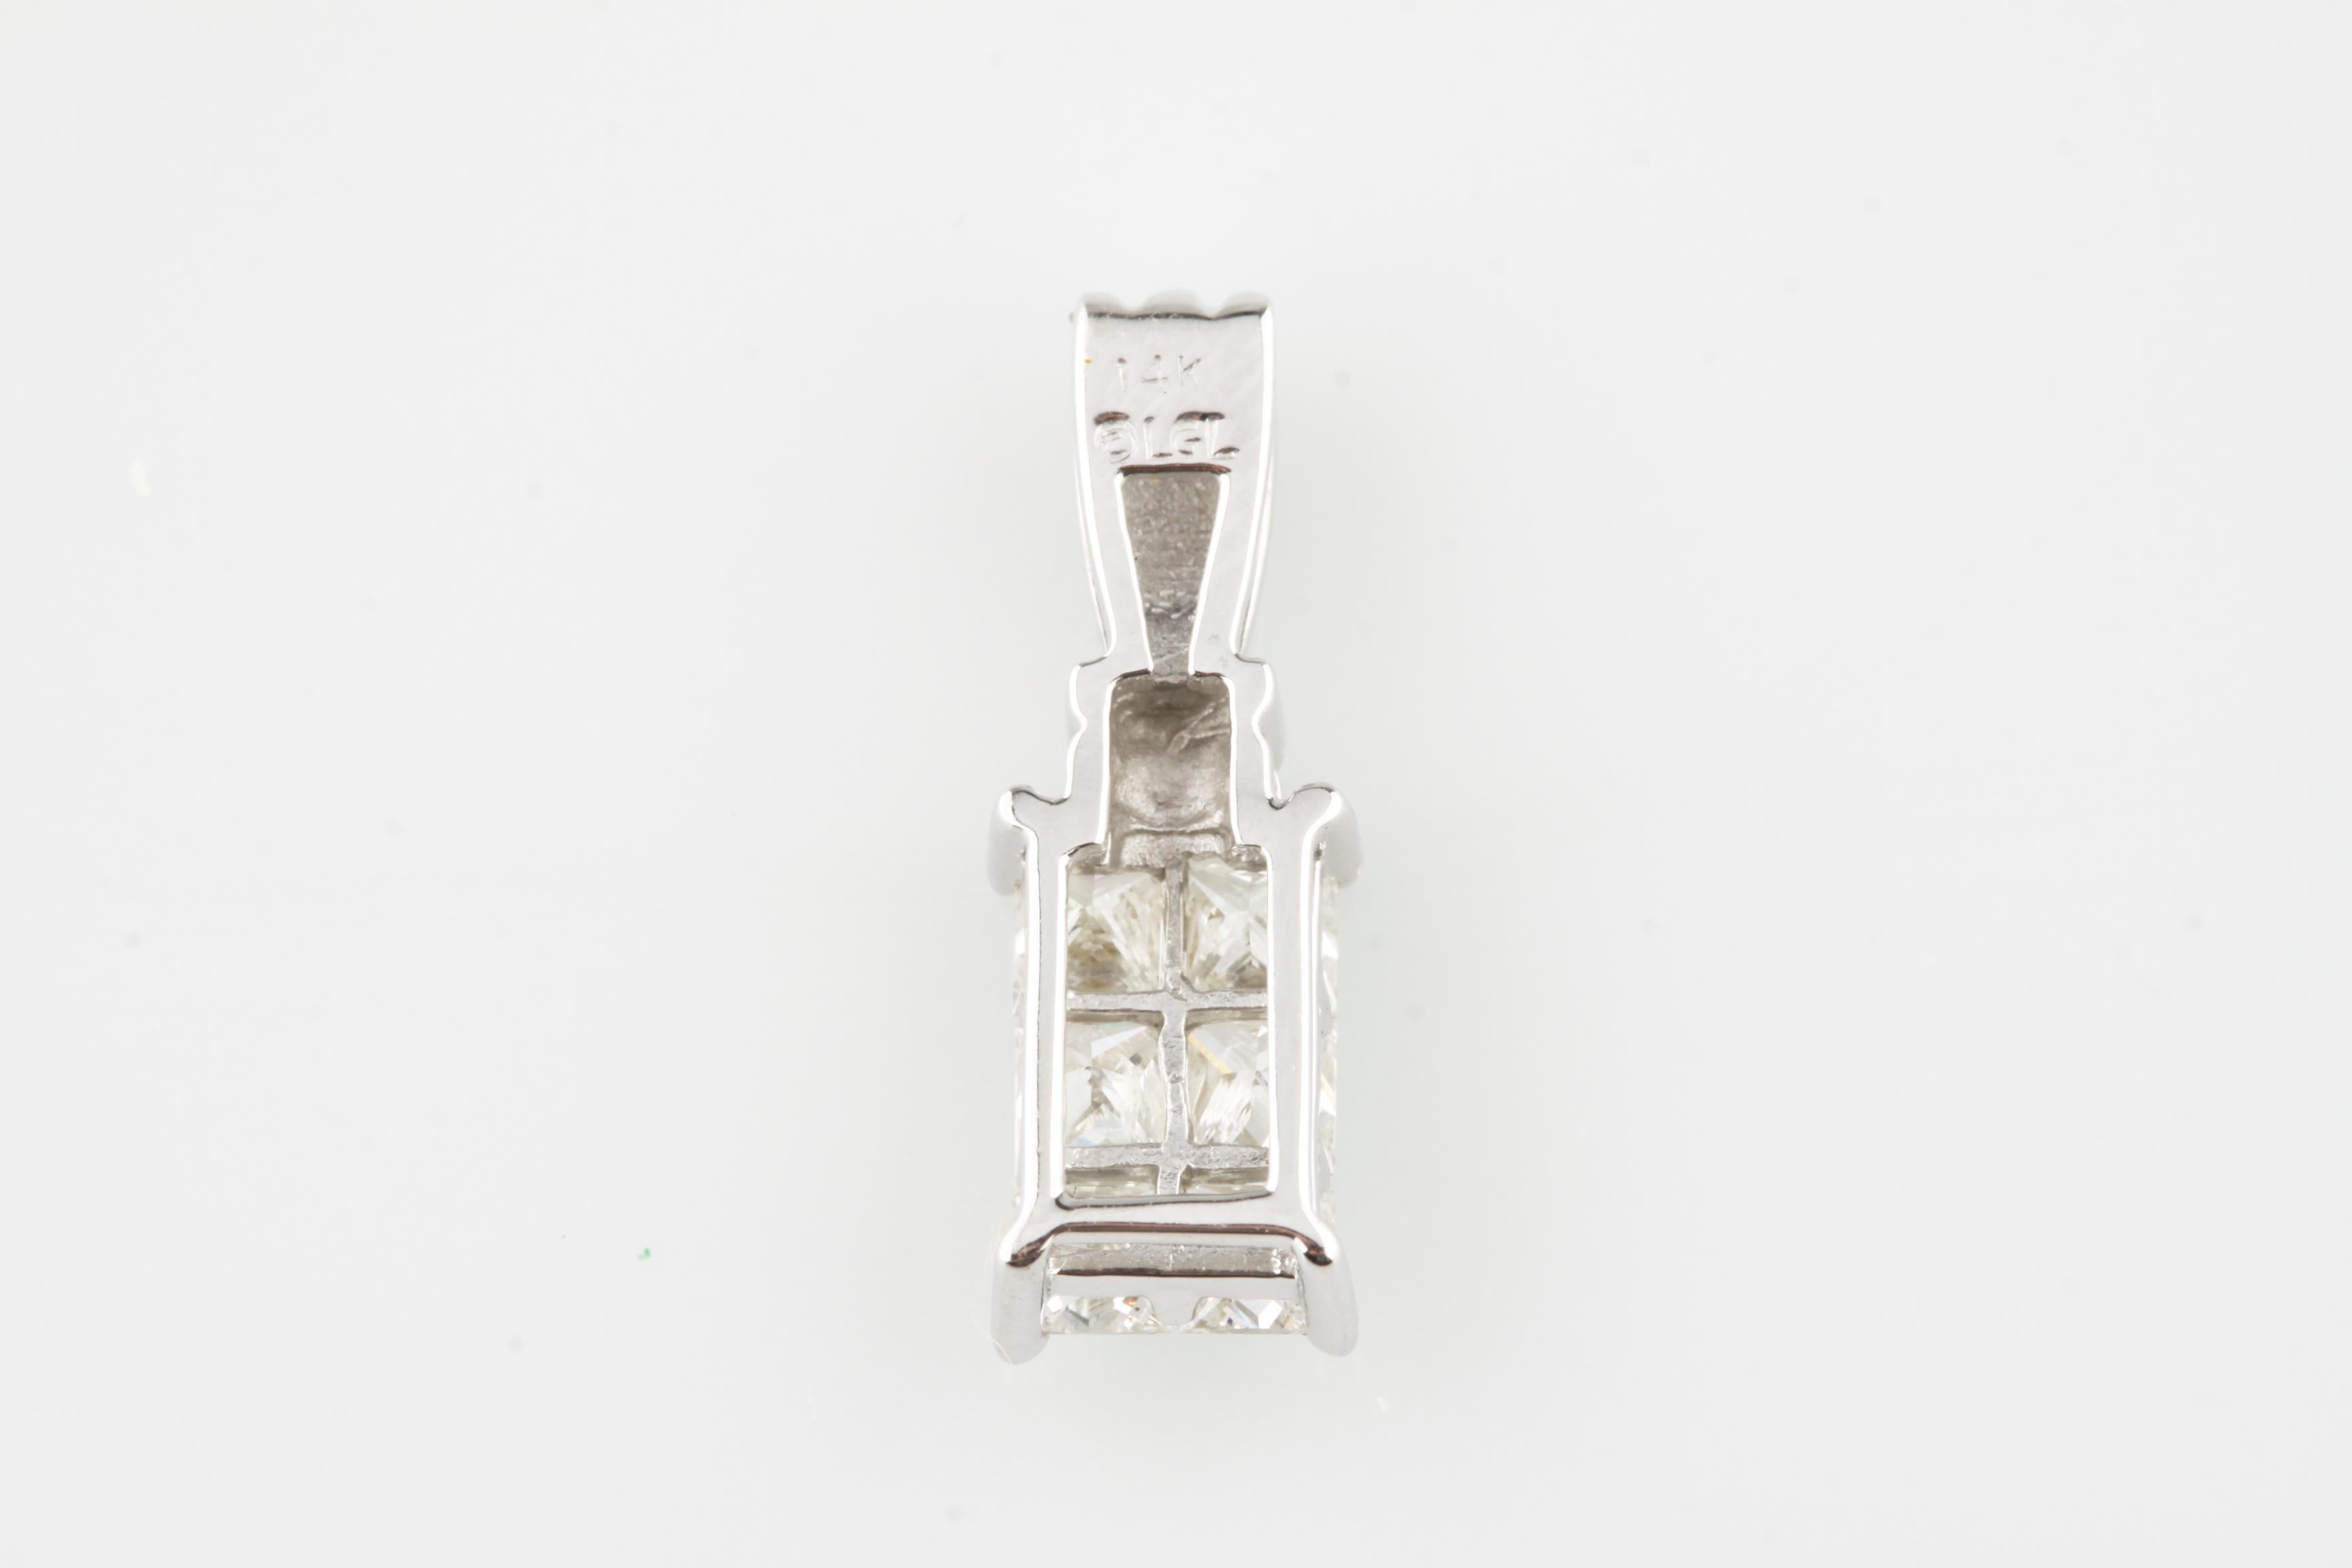 Gorgeous Diamond Pendant Set in 14k White Gold
Features Six Princess Cut Diamonds in Invisible Plaque Setting
Total Diamond Weight = 1.00 ct
Total Mass = 1.5 grams
Gorgeous Pendant! (Chain Not Included)